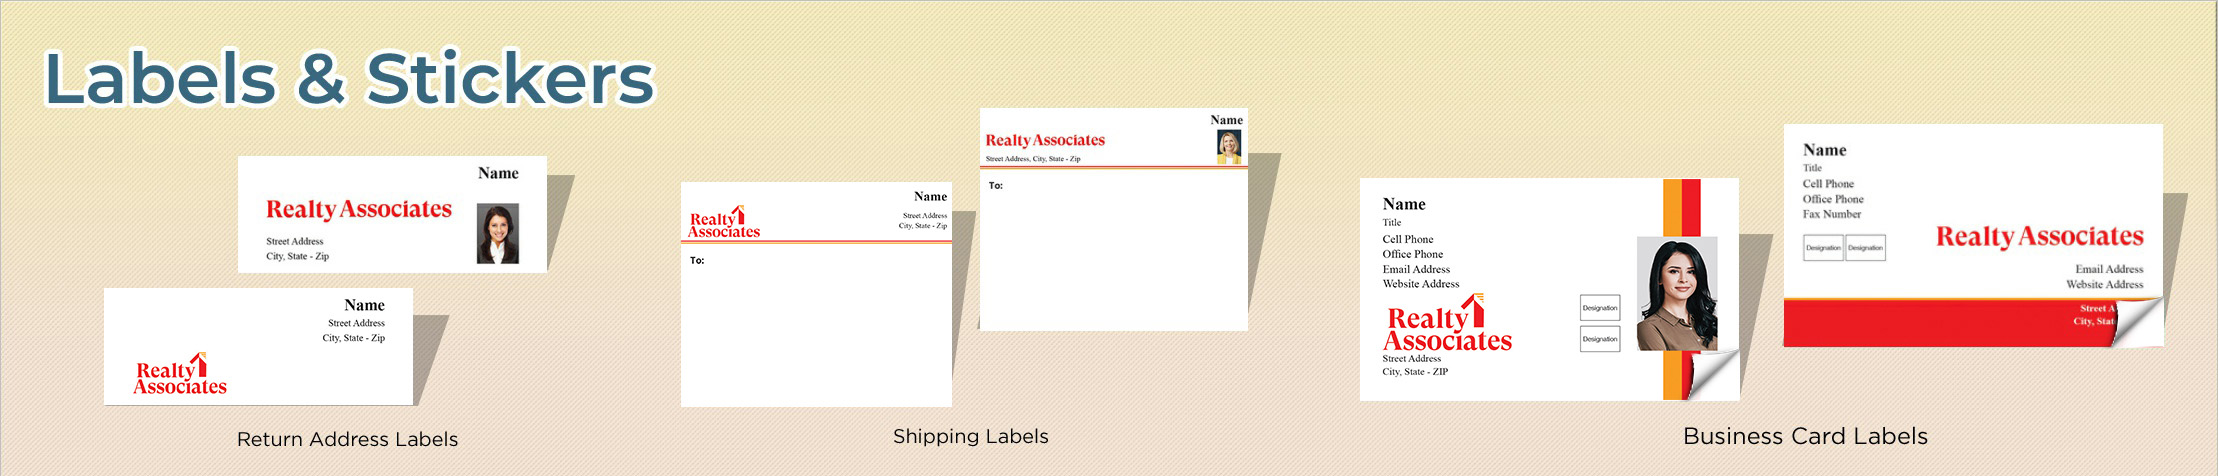 Realty Associates Real Estate Labels and Stickers - Realty Associates  business card labels, return address labels, shipping labels, and assorted stickers | BestPrintBuy.com